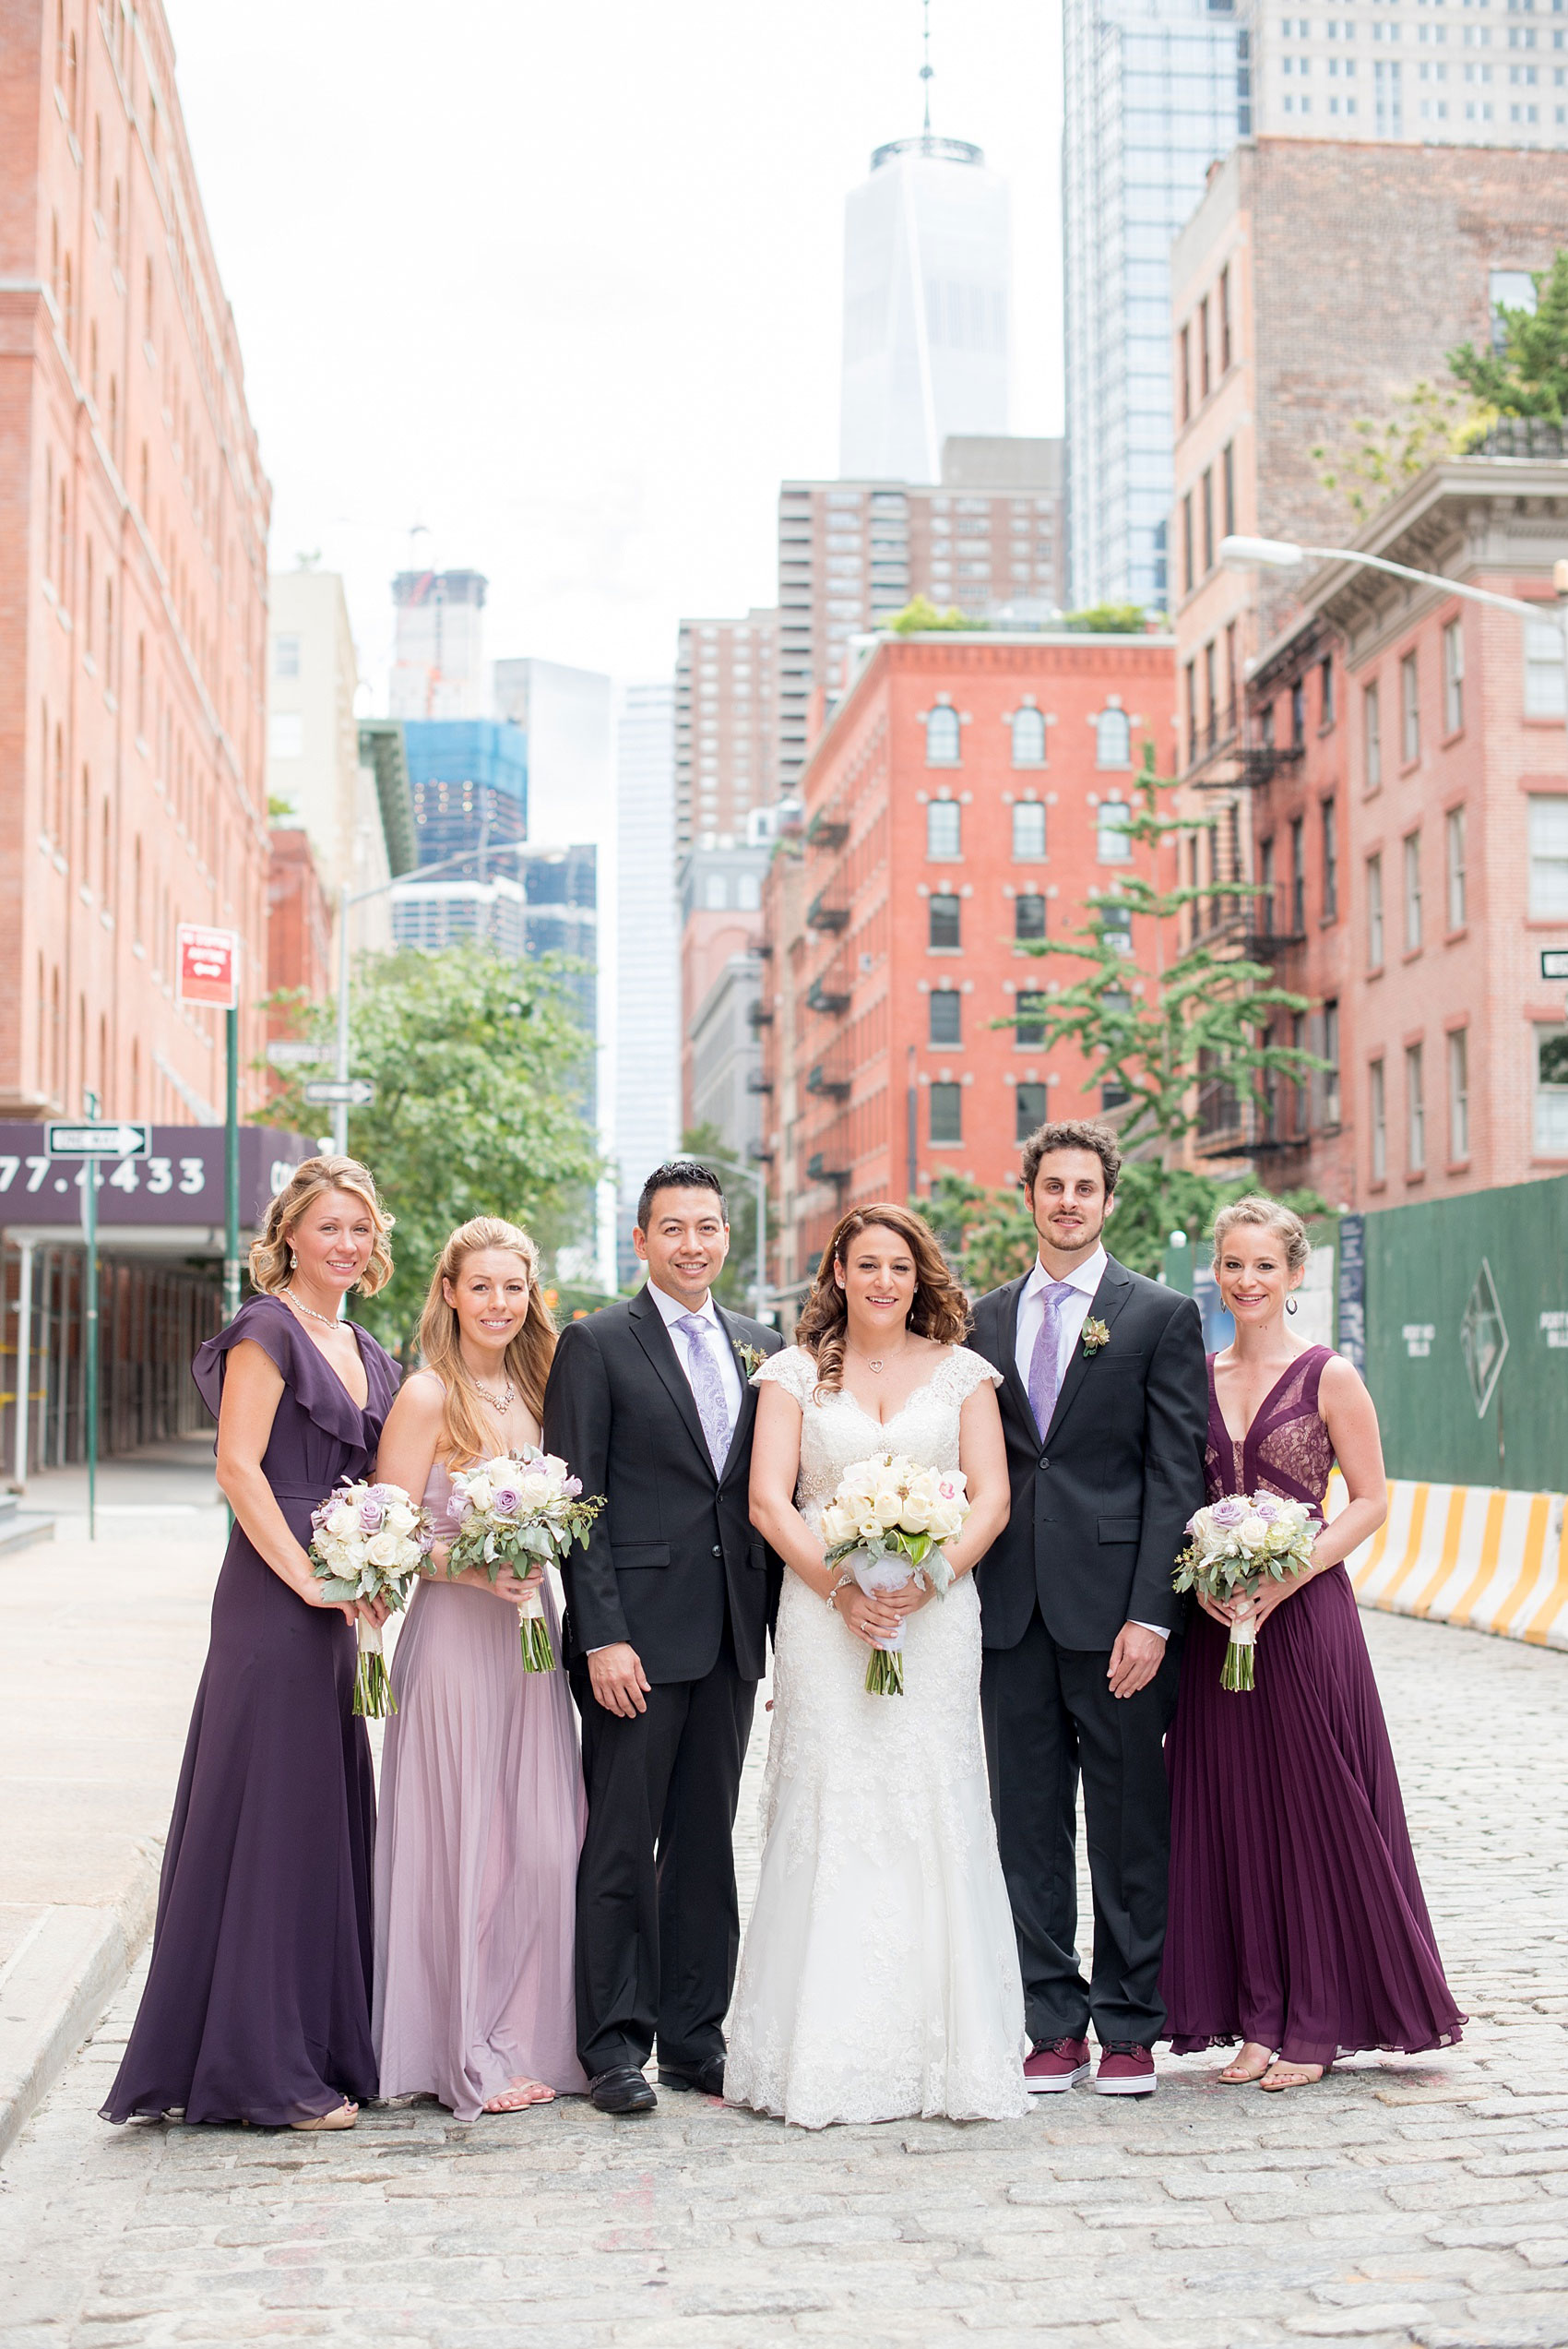 Mikkel Paige Photography photos of a NYC wedding at Tribeca Rooftop. An urban image of the wedding party in shades of mismatched purple dresses with rose and succulent bouquets.